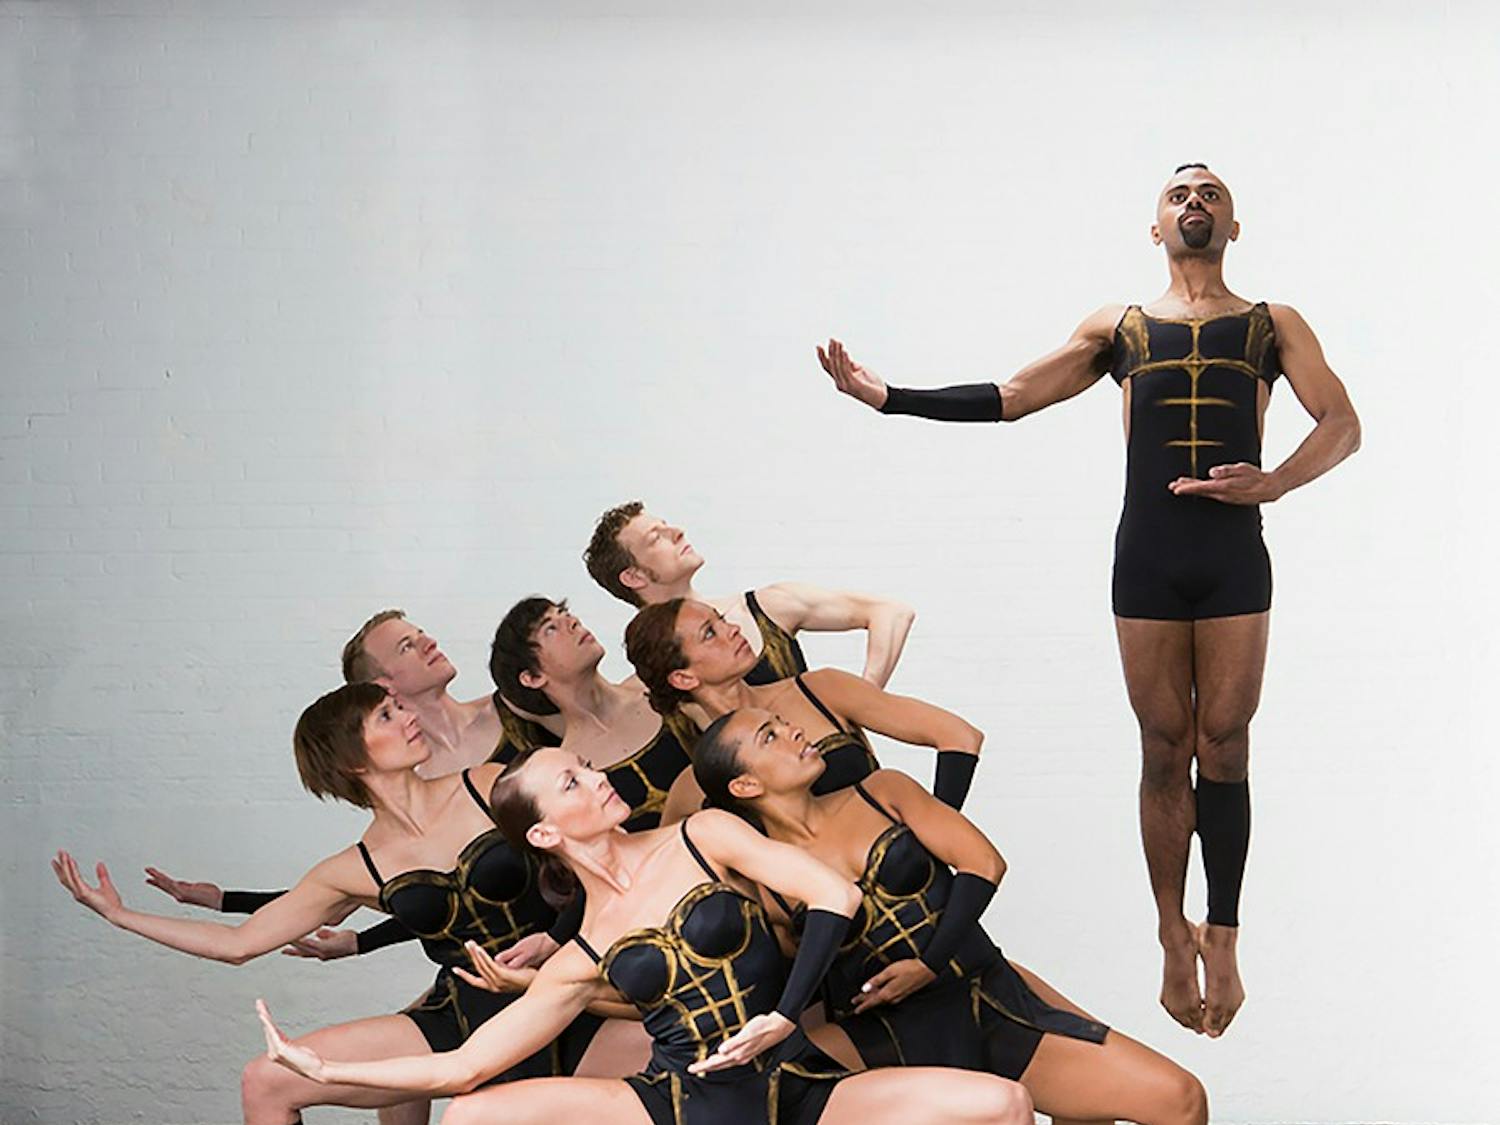 The Lehrer Dance Company’s opening performance of the year combined onstage wit and honed gracefulness, enrapturing the sellout crowd at the Center for the Arts on Saturday.